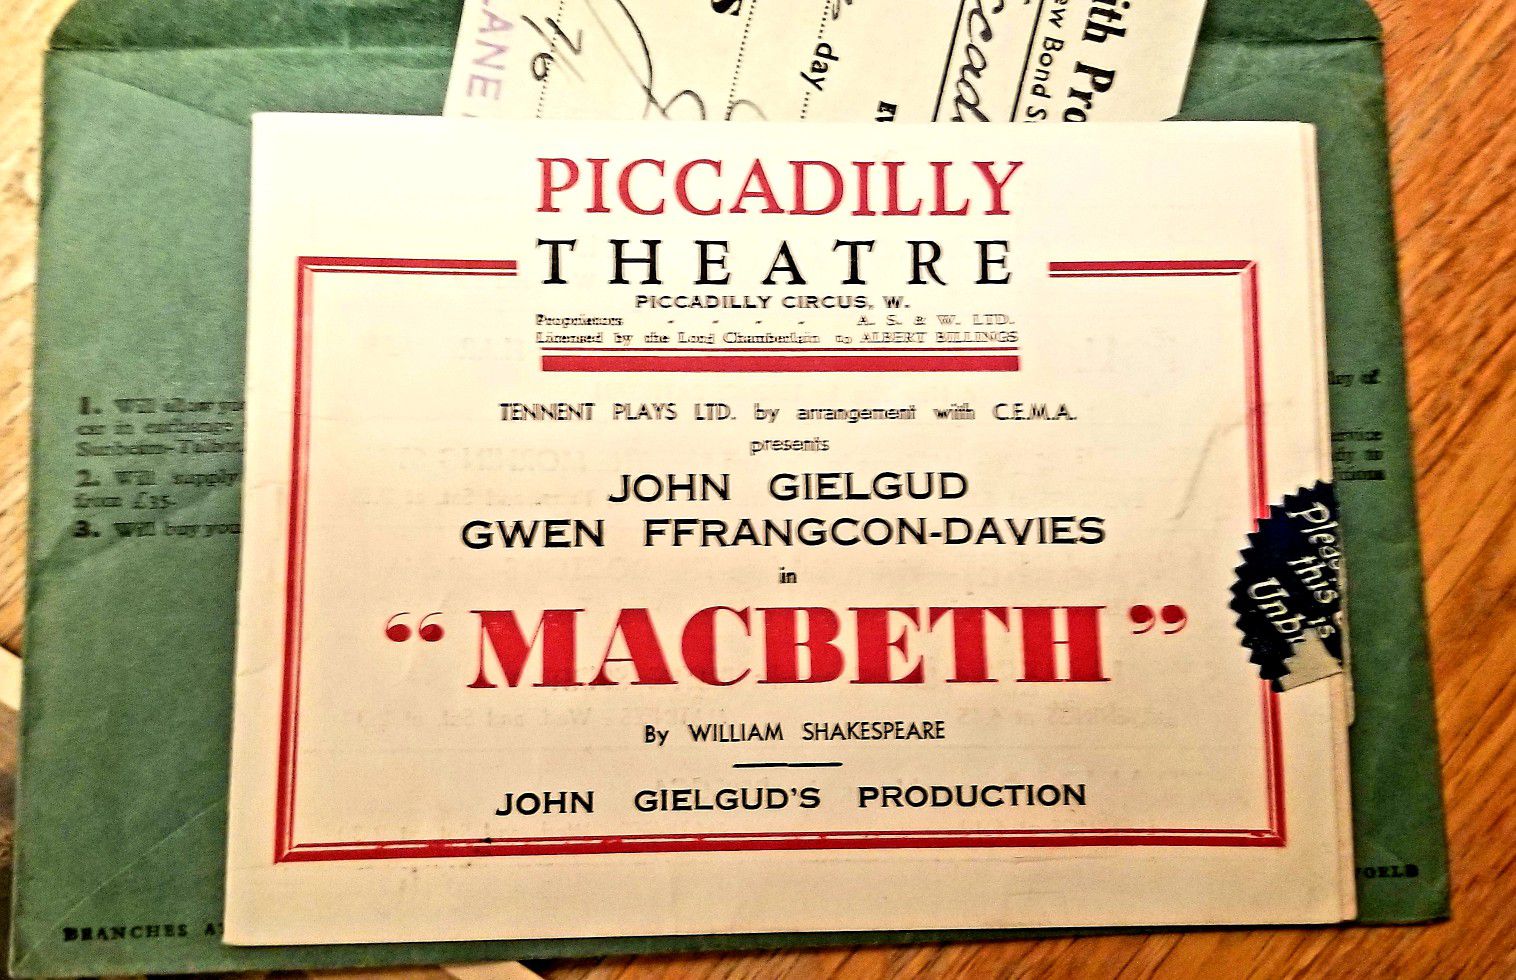 July 29, 1942 tickets to MACBETH at the PICCADILLY THEATRE IN LONDON